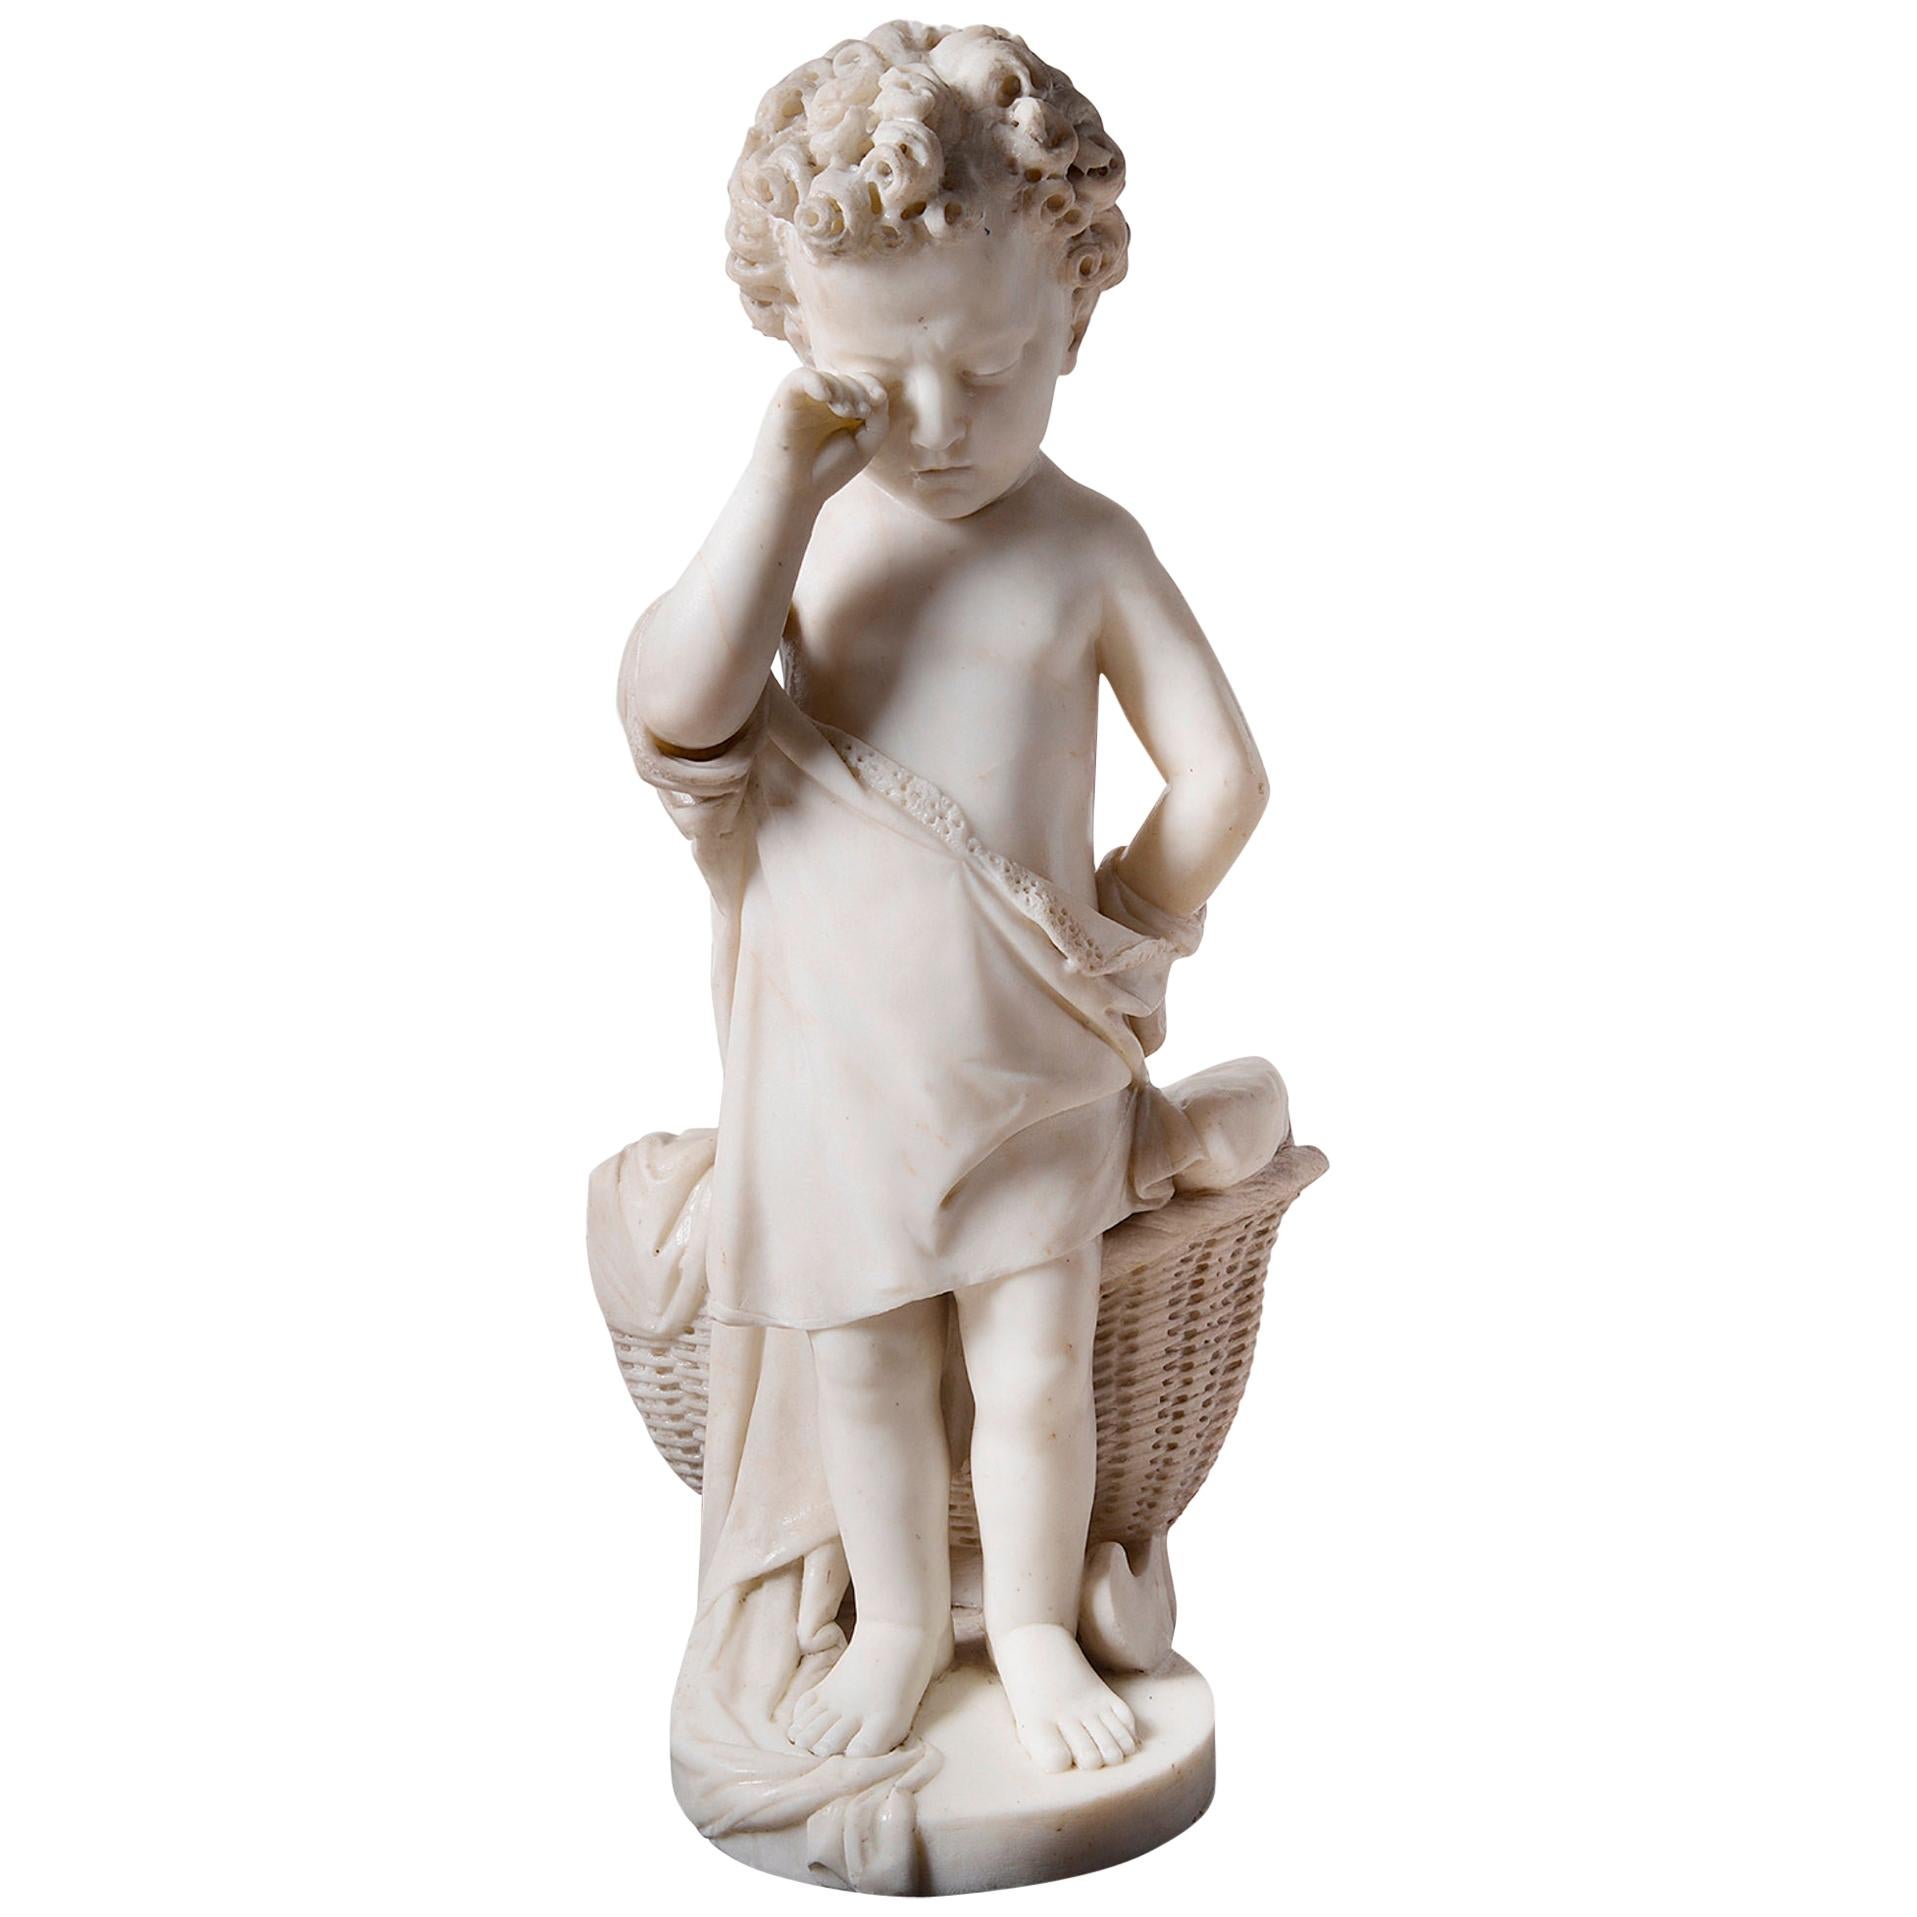 19th Century Italian Marble Statue of Crying Child